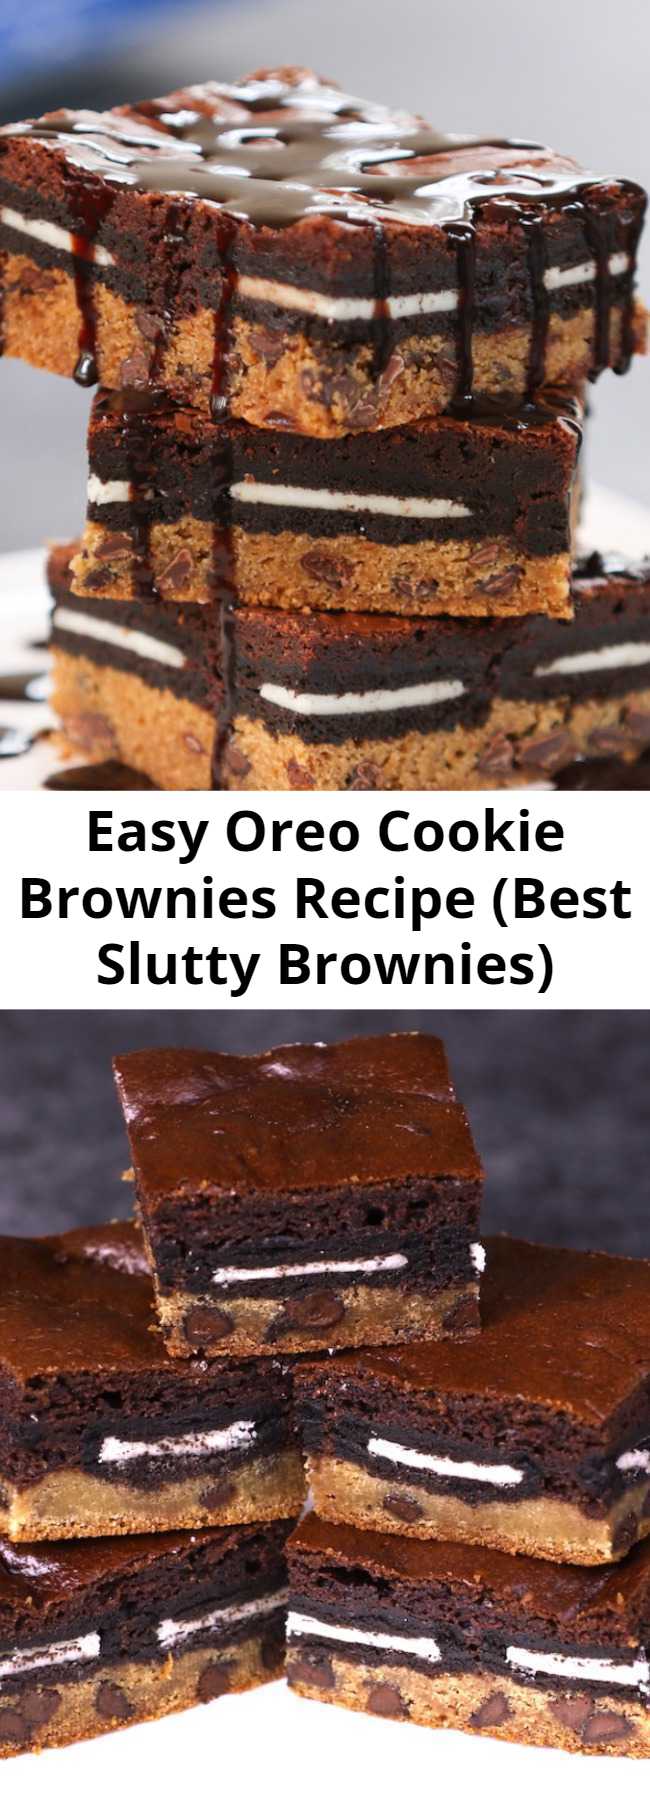 Easy Oreo Cookie Brownies Recipe (Best Slutty Brownies) - These Slutty Brownies melt in your mouth with rich layers of cookie dough, Oreo cookies and brownies. This slutty brownie recipe is easy to make whenever you want an extra-decadent treat!